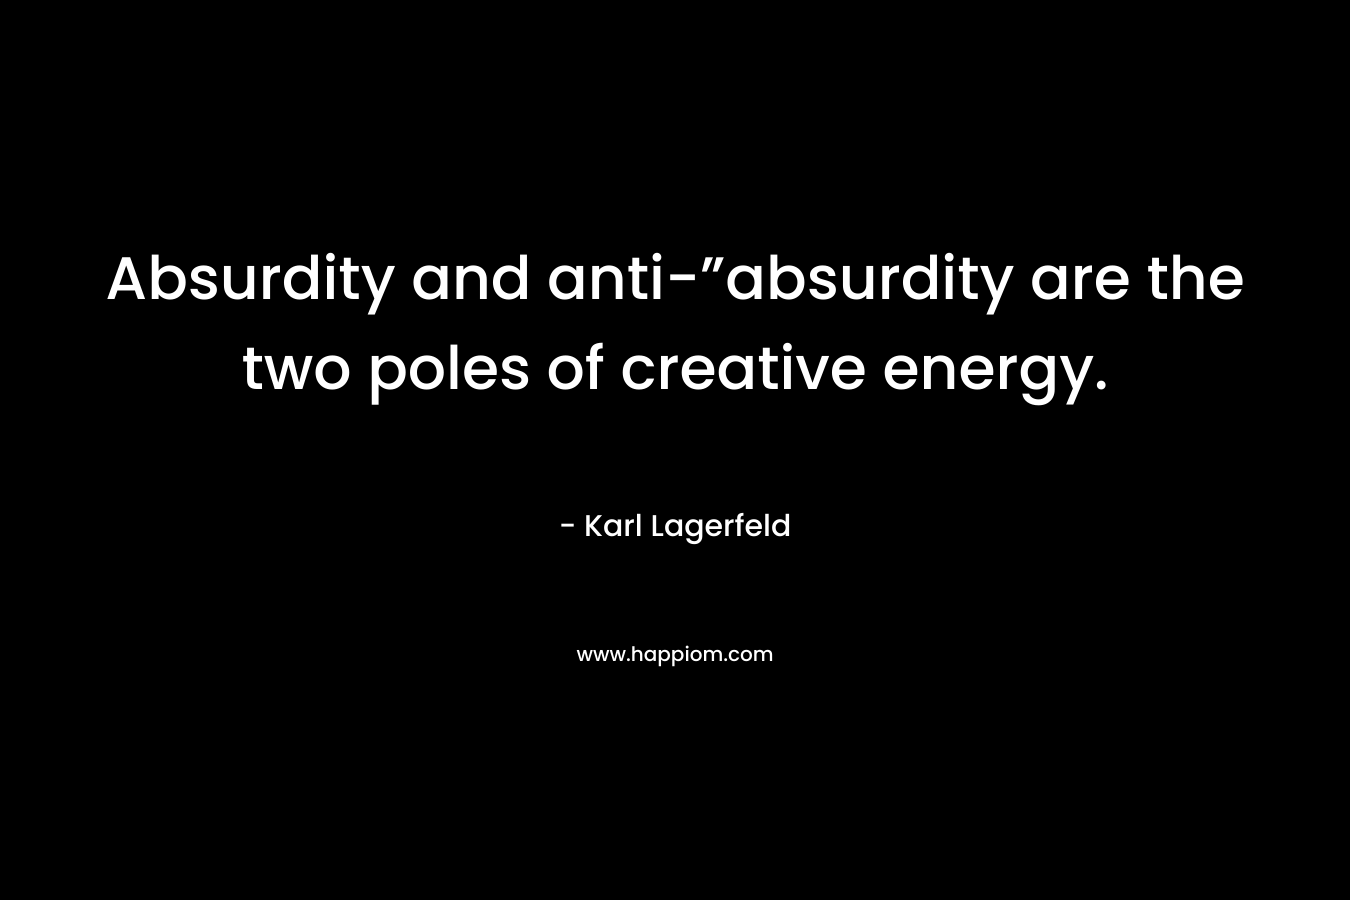 Absurdity and anti-”absurdity are the two poles of creative energy. – Karl Lagerfeld